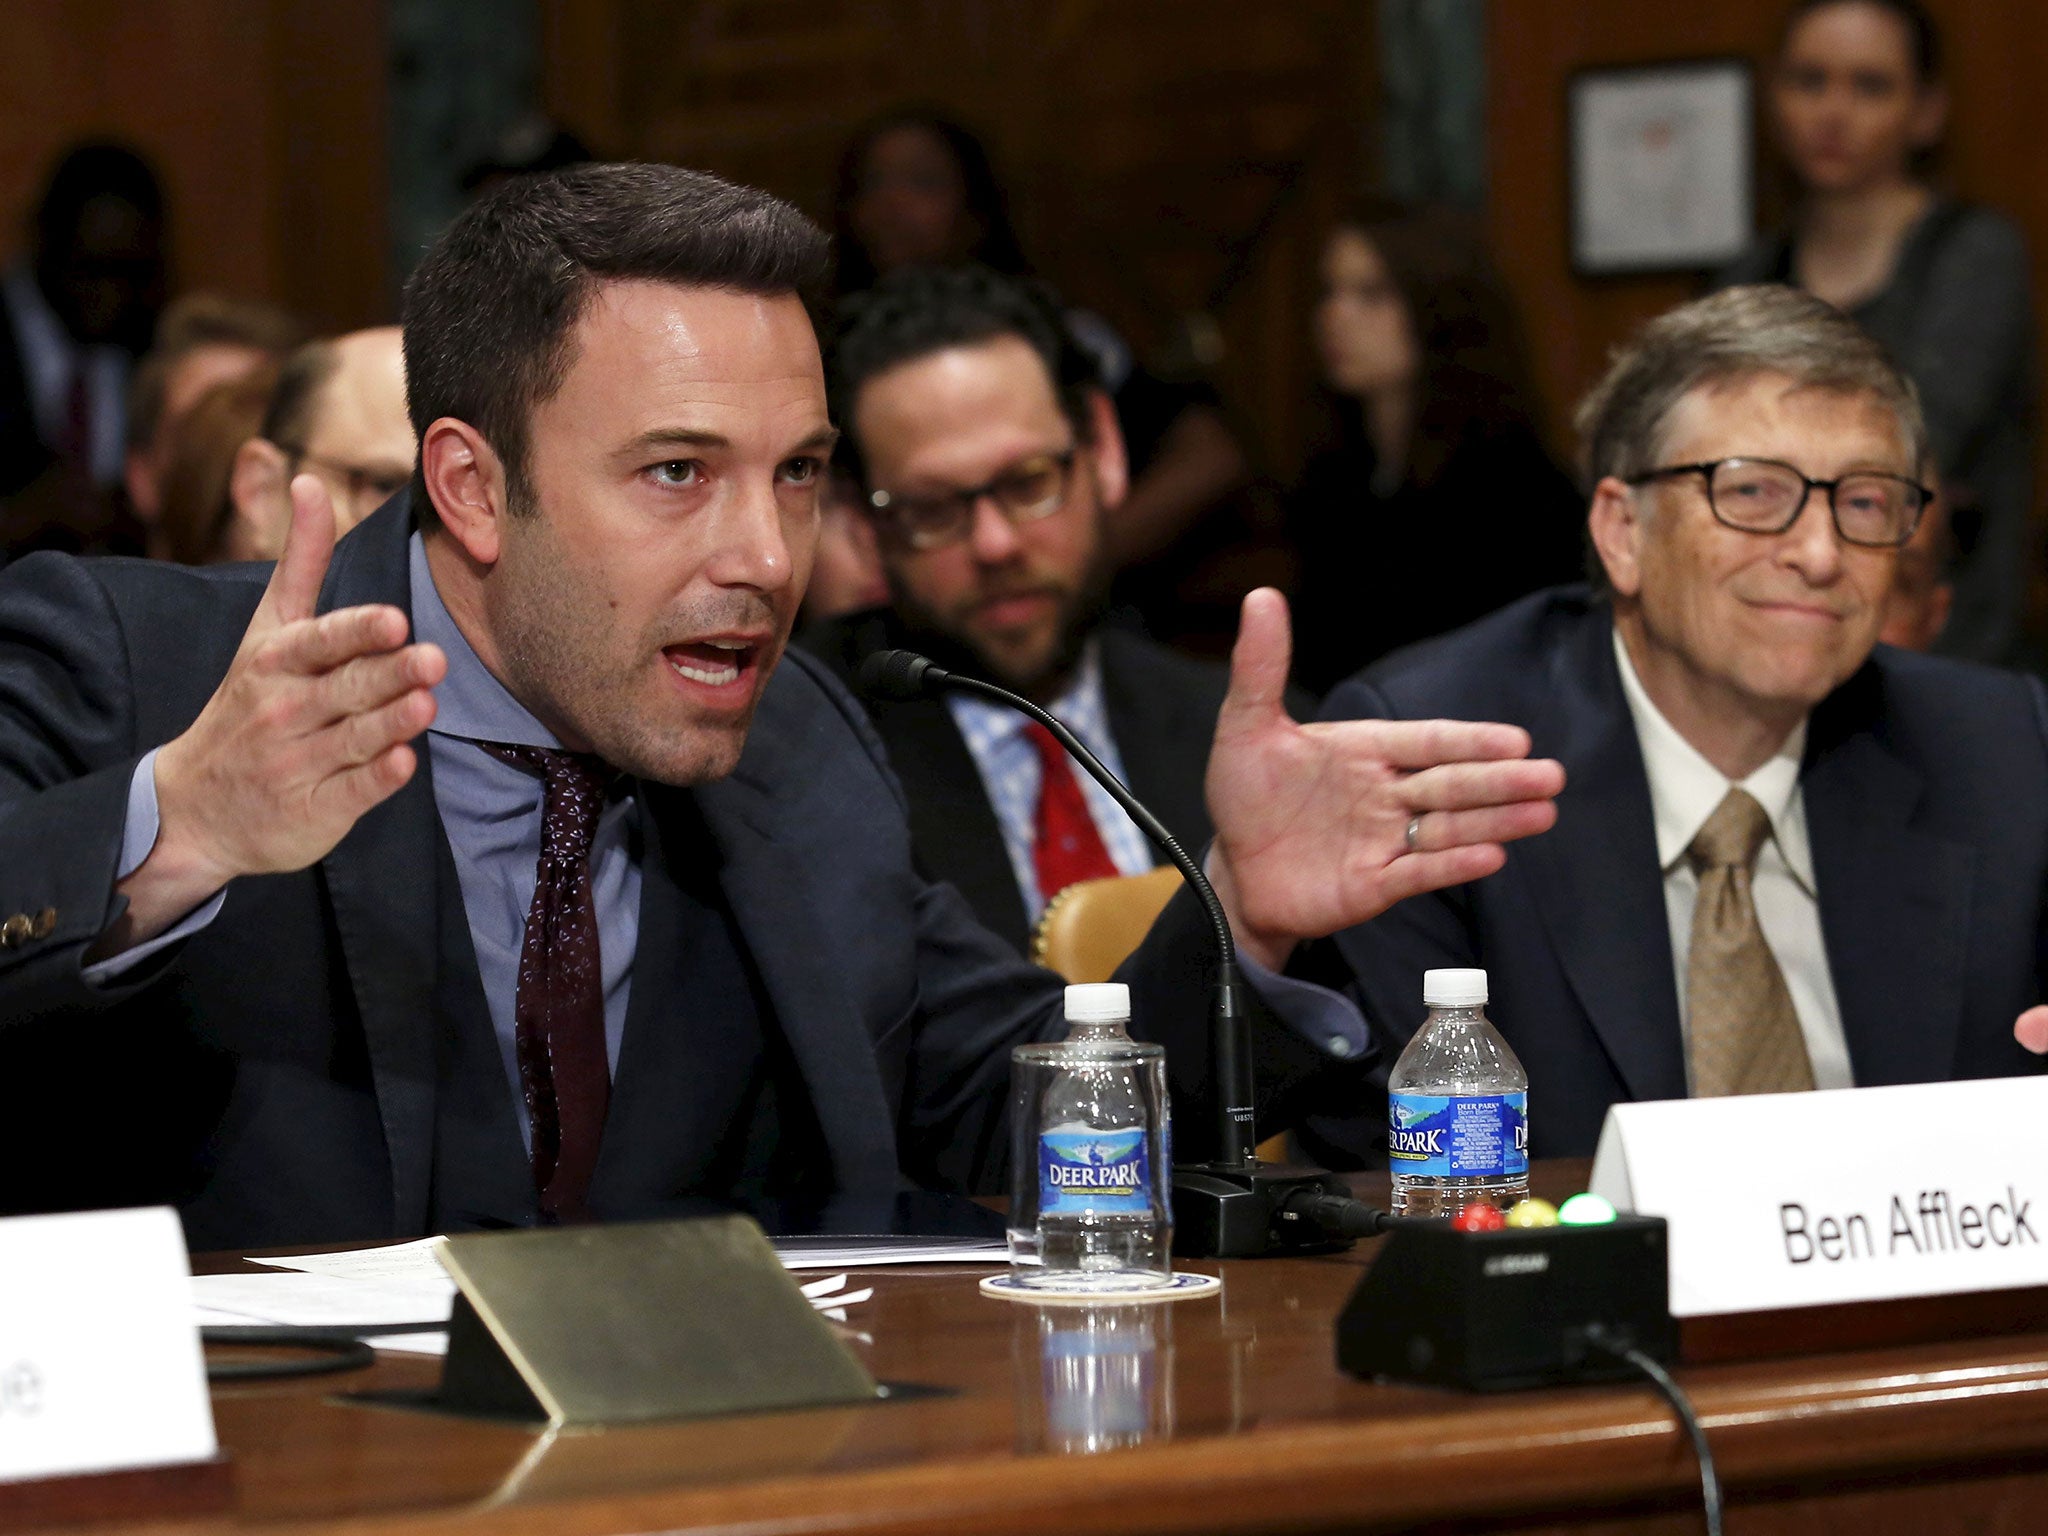 Ben Affleck, testifies next to Bill Gates, before a Senate Appropriations State, Foreign Operations and Related Programs Subcommittee hearing on "Diplomacy, Development, and National Security" on Capitol Hill in Washington